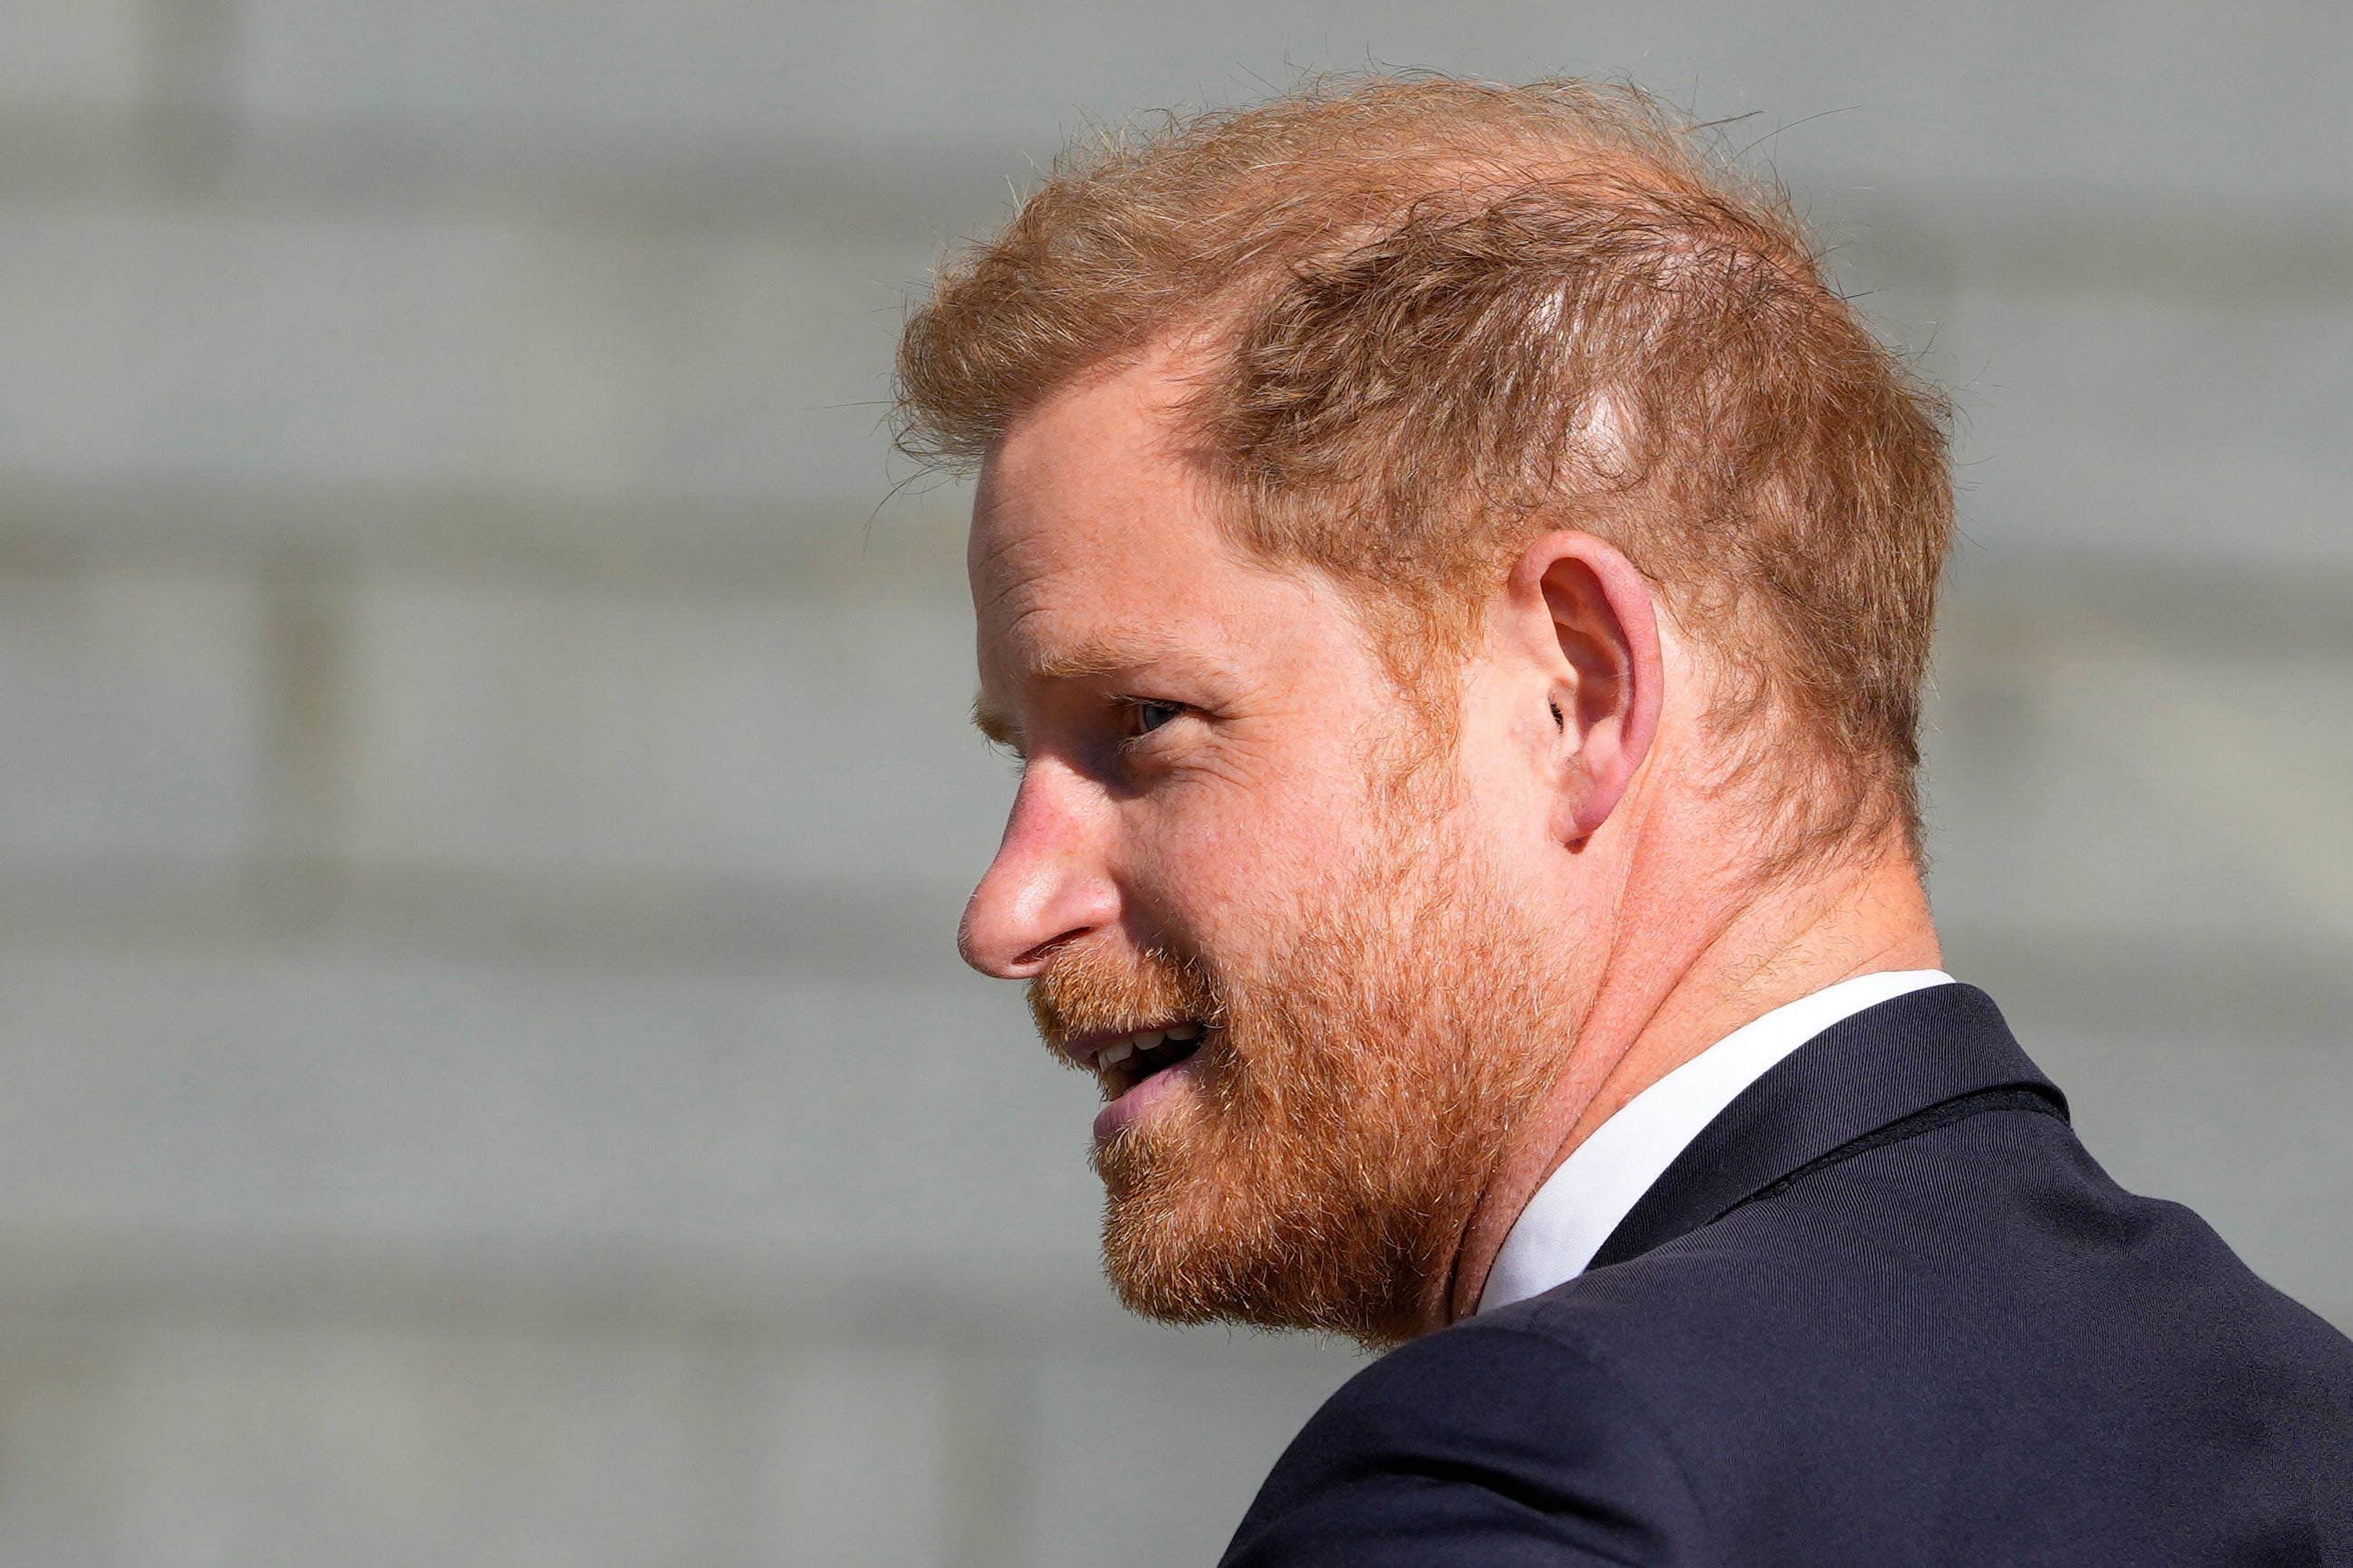 A petition has been launched to stop Prince Harry receiving an award.